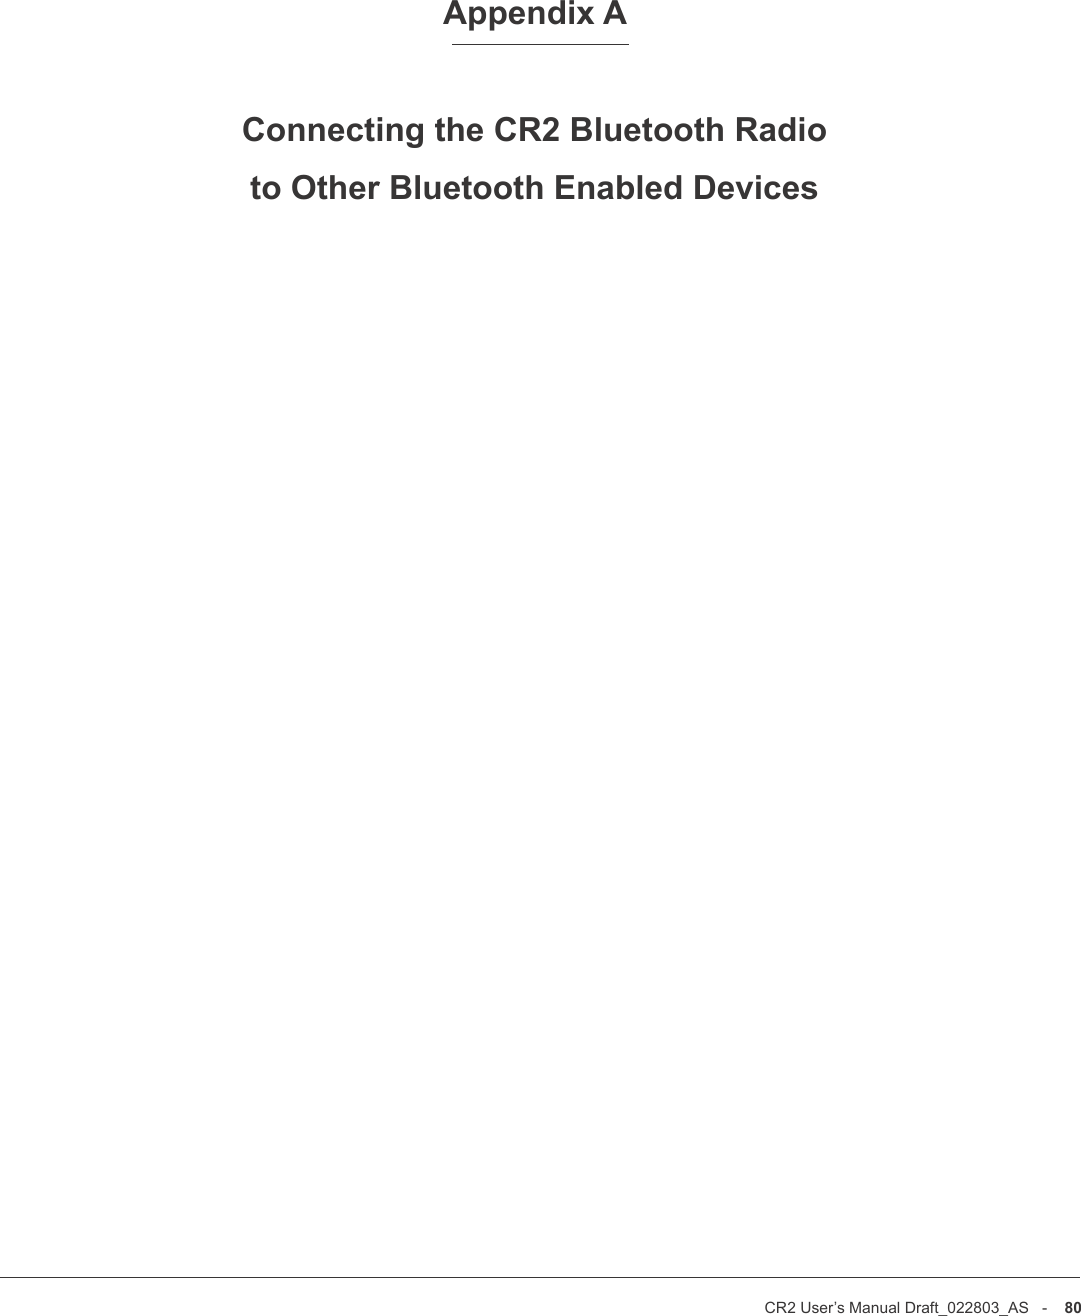 CR2 User’s Manual Draft_022803_AS   -    80CR2 User’s Manual Draft_022803_AS   -    81Appendix AConnecting the CR2 Bluetooth Radioto Other Bluetooth Enabled Devices